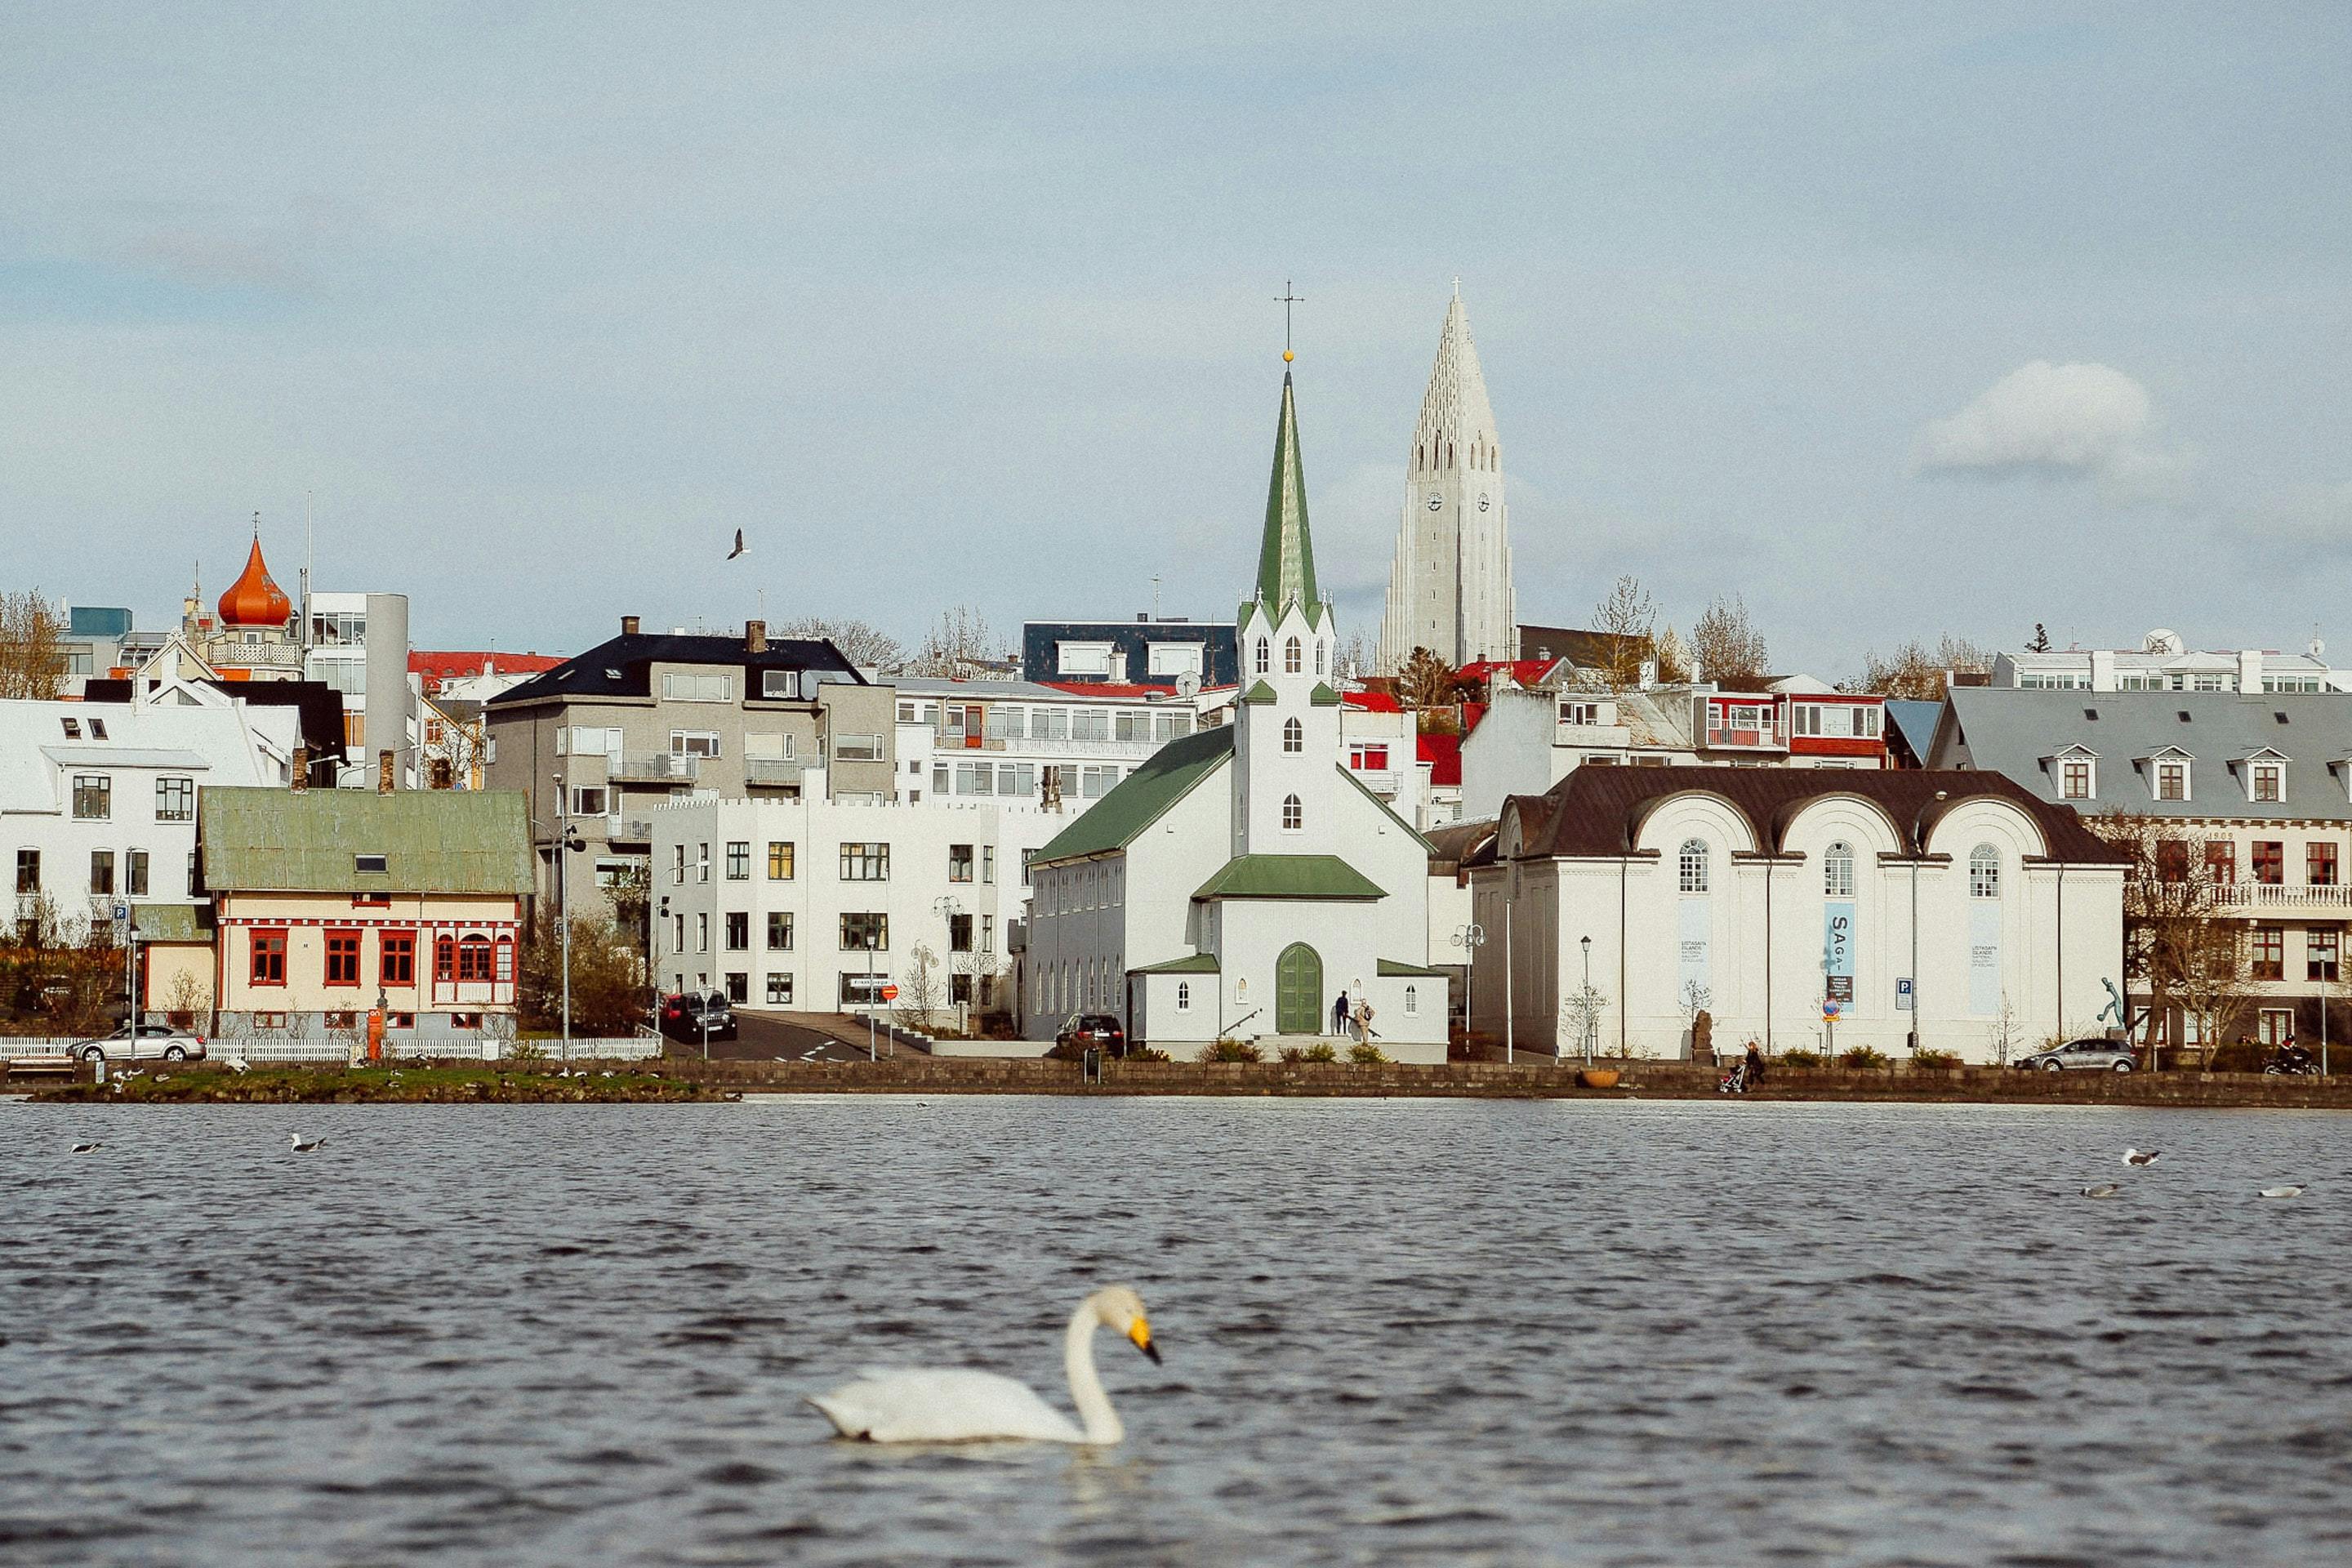 Tour of instagrammable spots Reykjavik with a local Musement